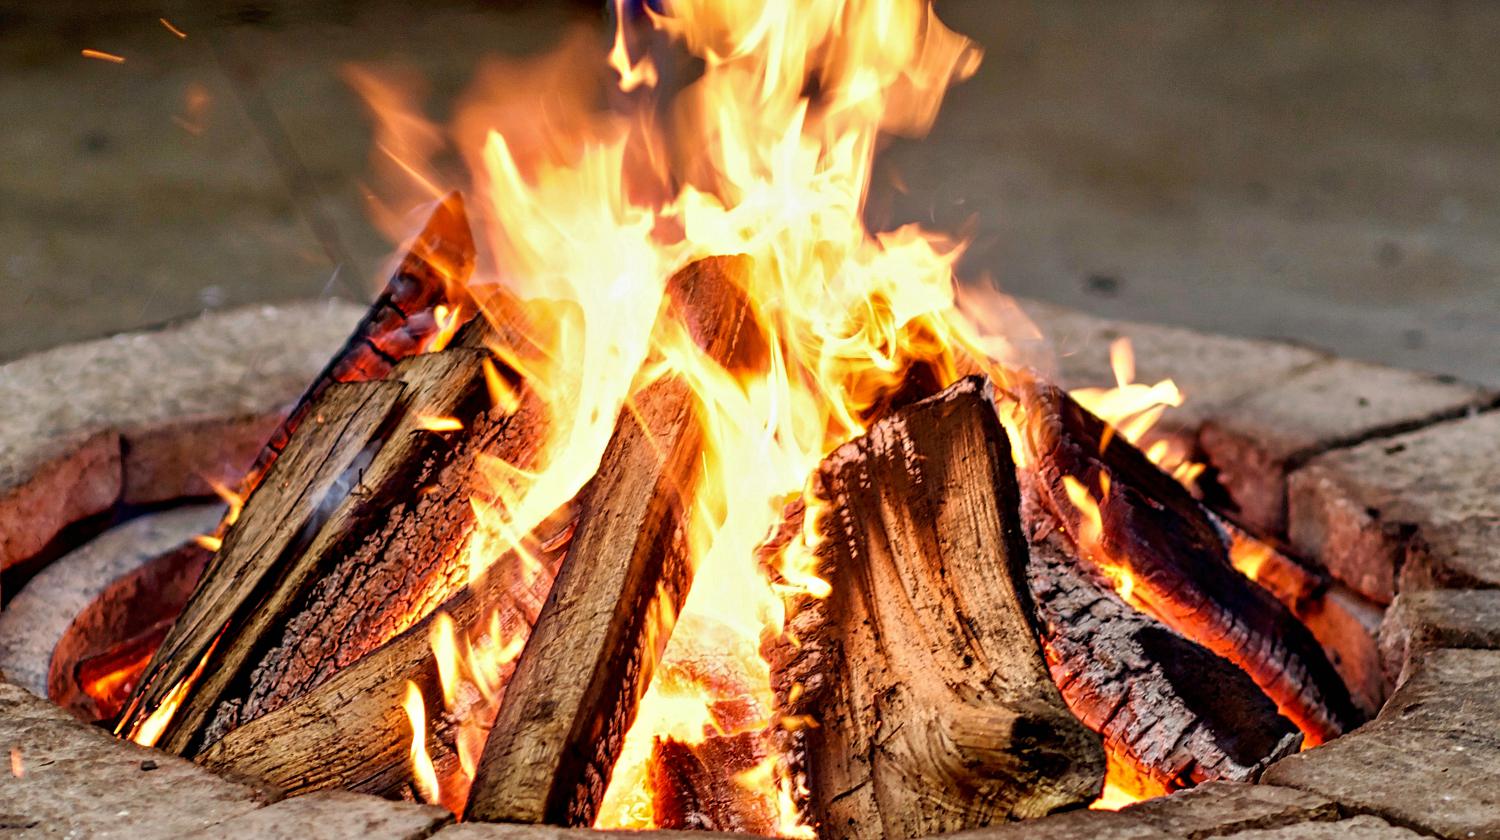 Close-up, roaring fire with blurred flames from wood logs in a stone firepit | How To Build A Fire Pit | Featured